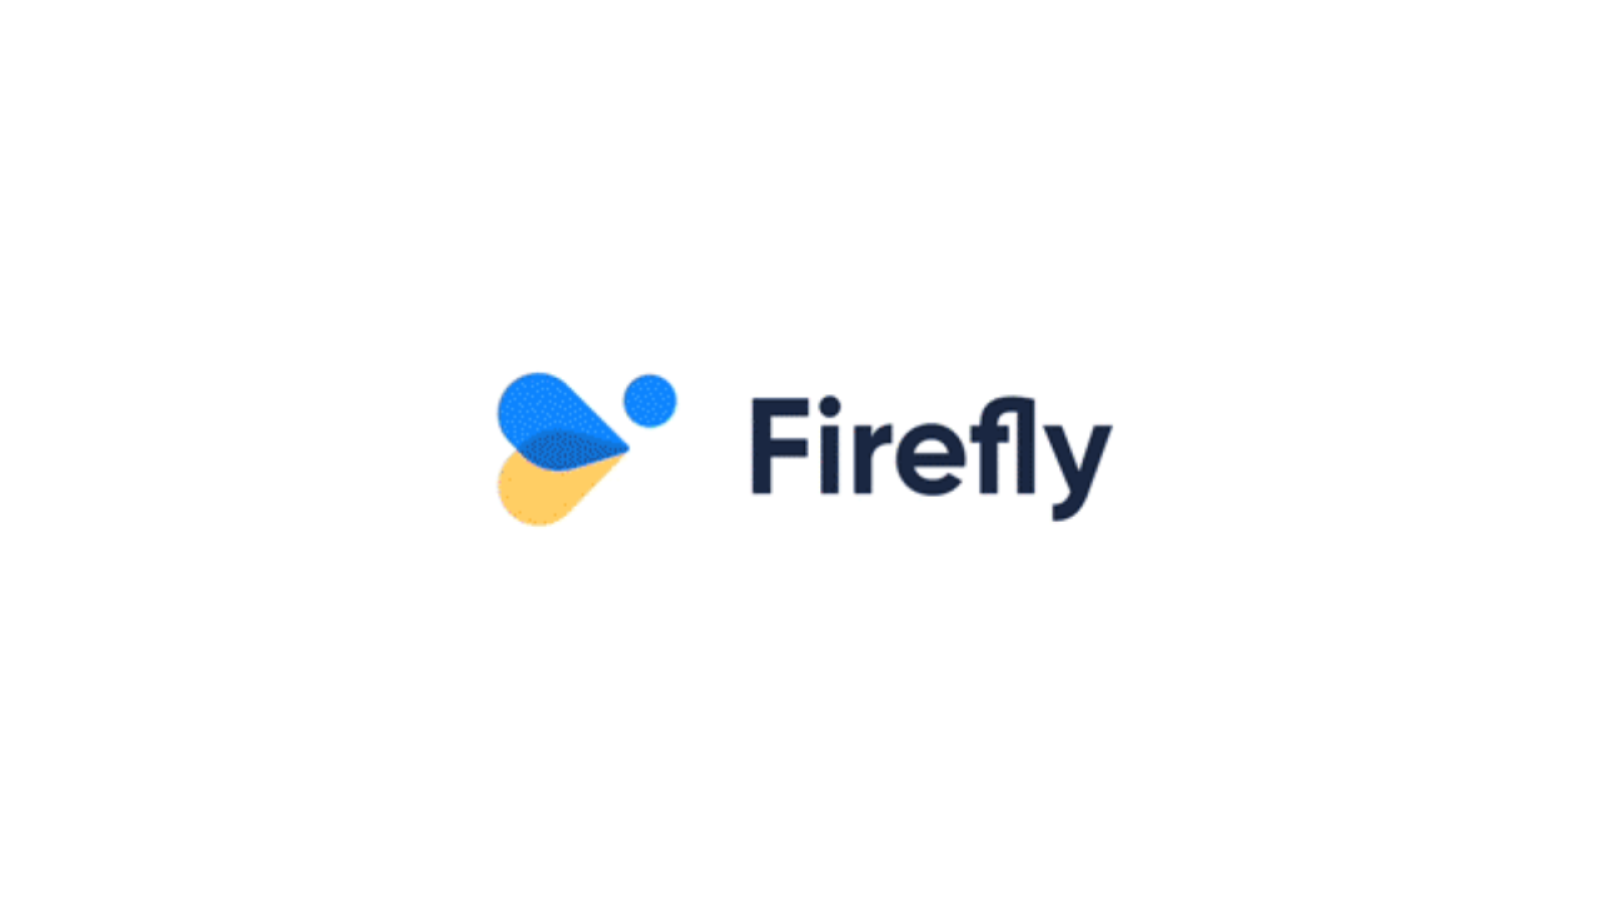 IOTA introduces Firefly wallet